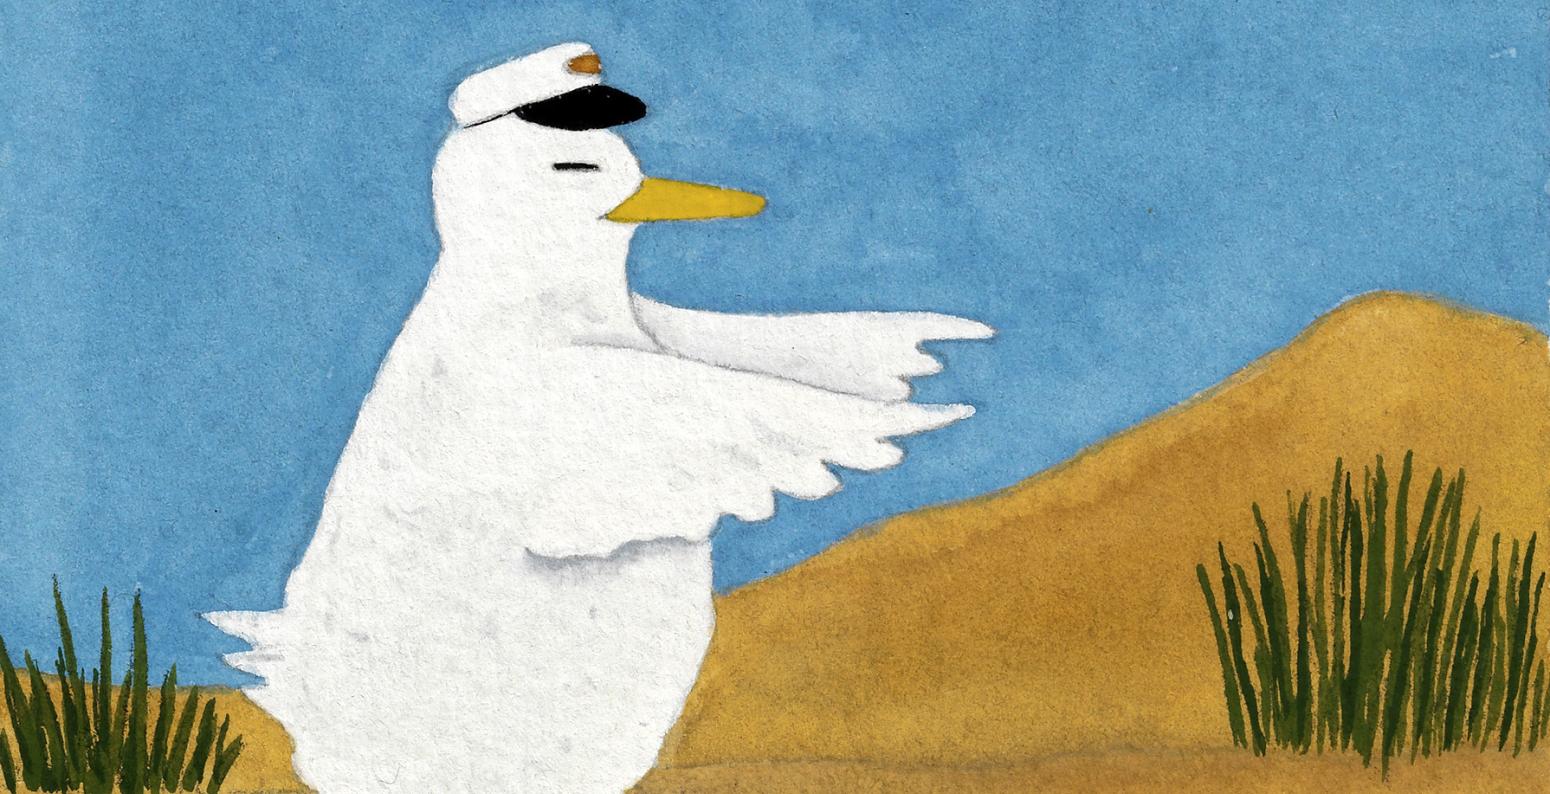 illustration of white duck wearing a cap and walking with his eye closed and wings reaching out infront of him, tan colored ground and blue sky background